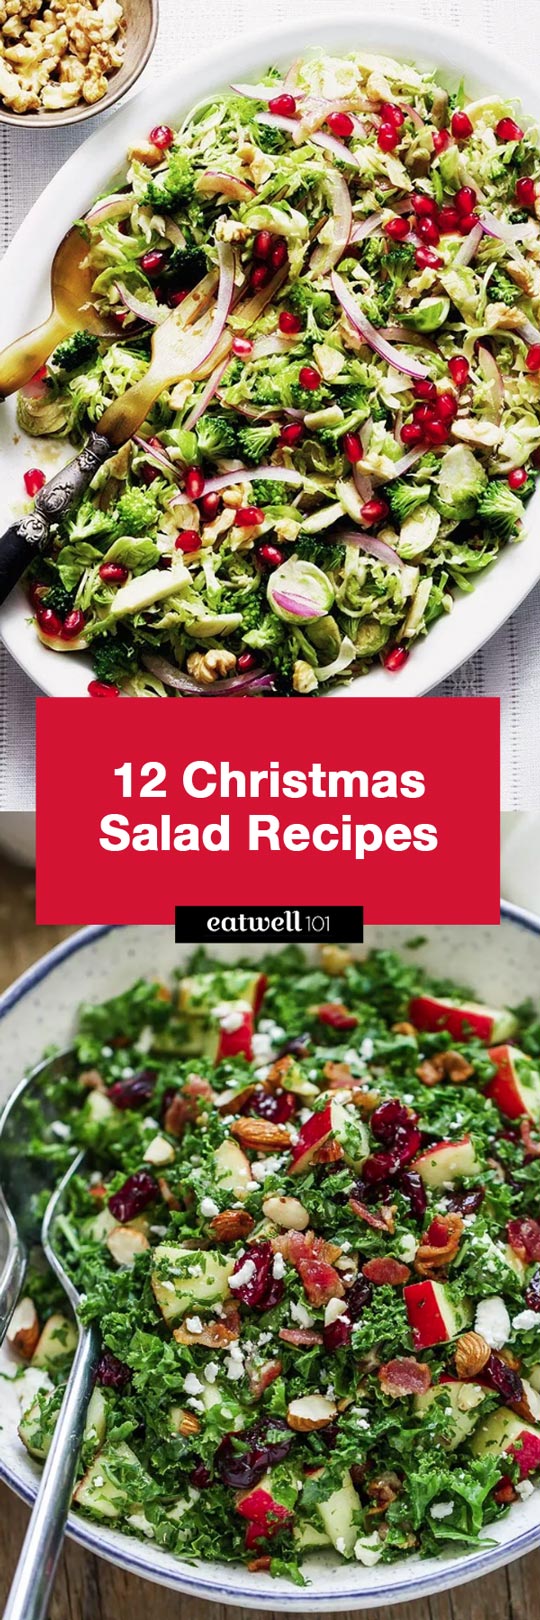 These Holiday salad ideas are perfect if you crave a plate of flavor-packed greens on Christmas Day.